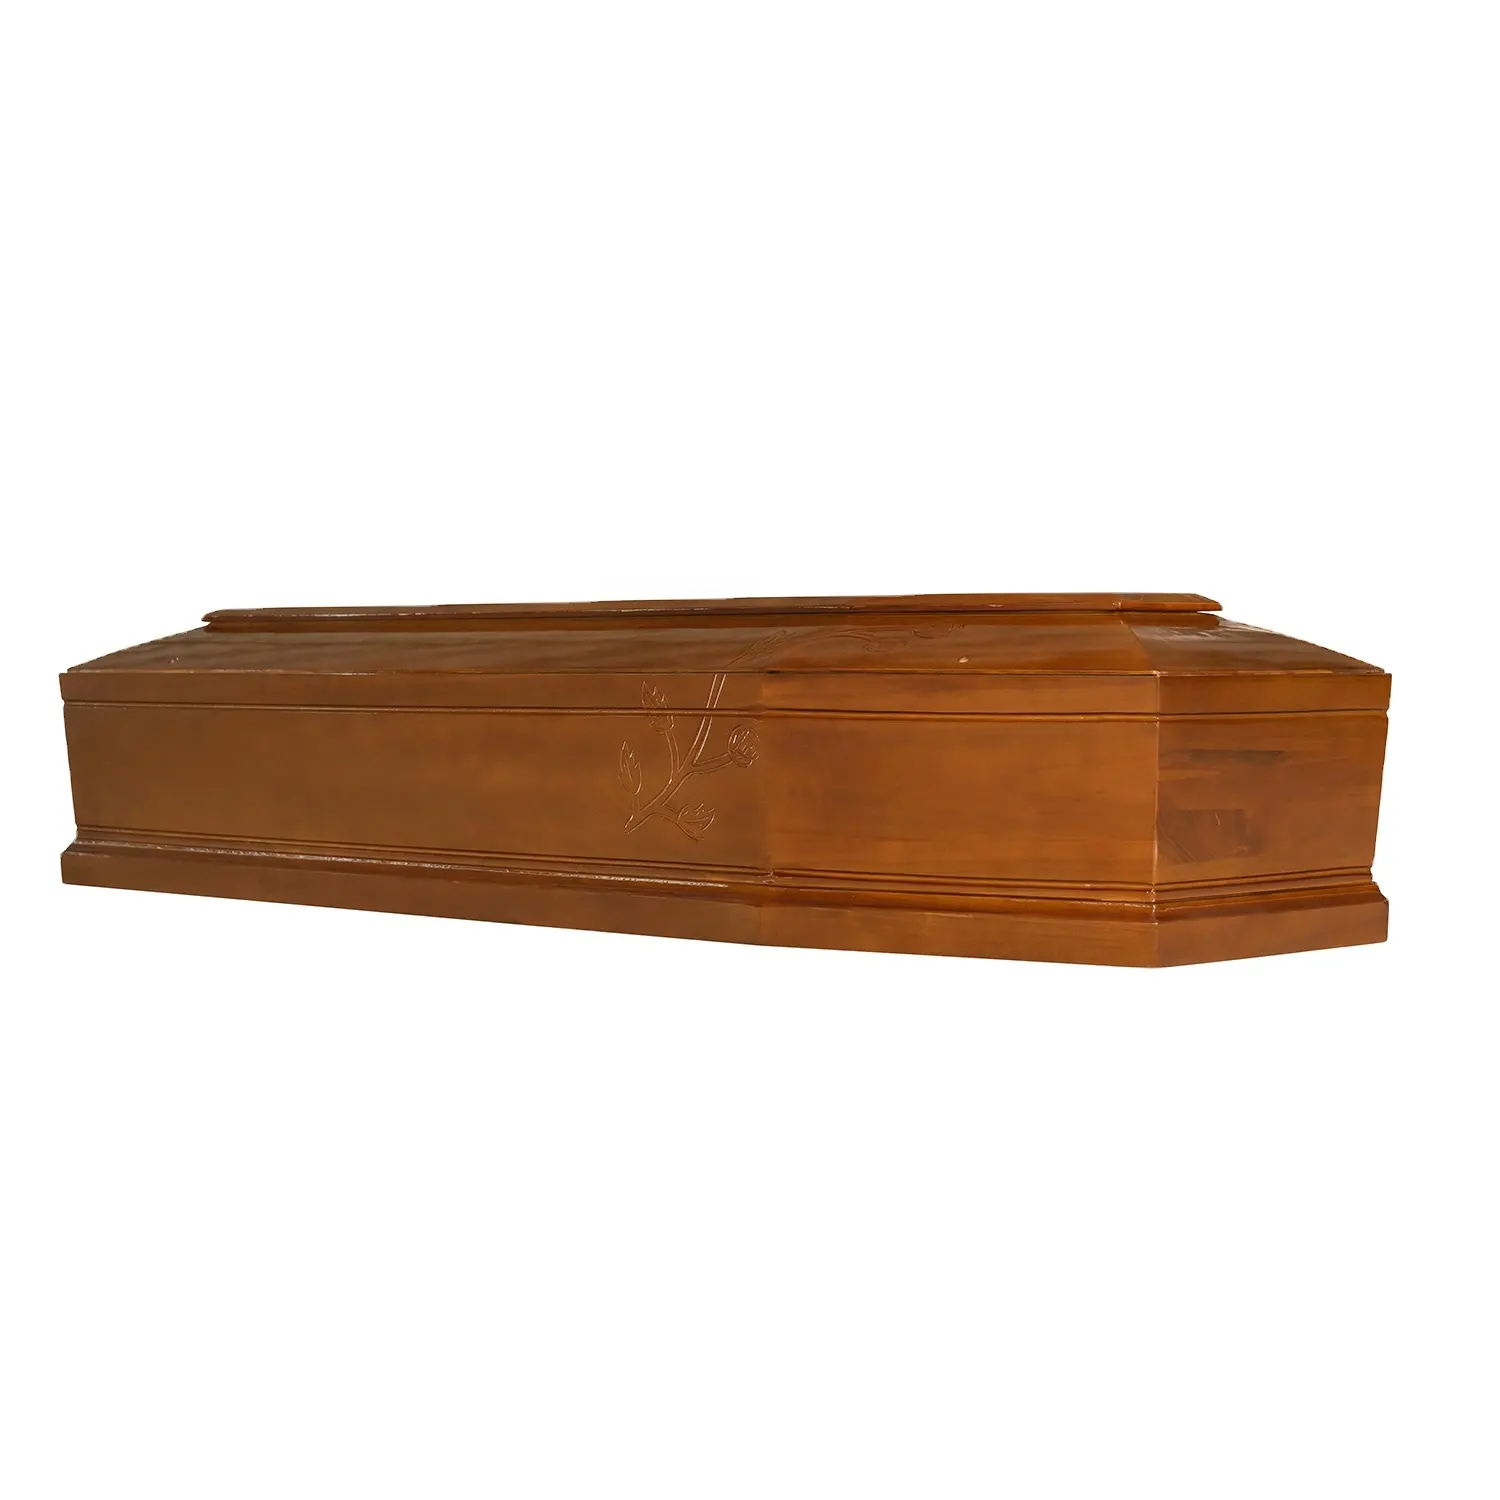 Lady Mary Italian style oak wood coffin Funeral Solid Wood burial vault combo bed Wood casket and coffin box Cremation coffin